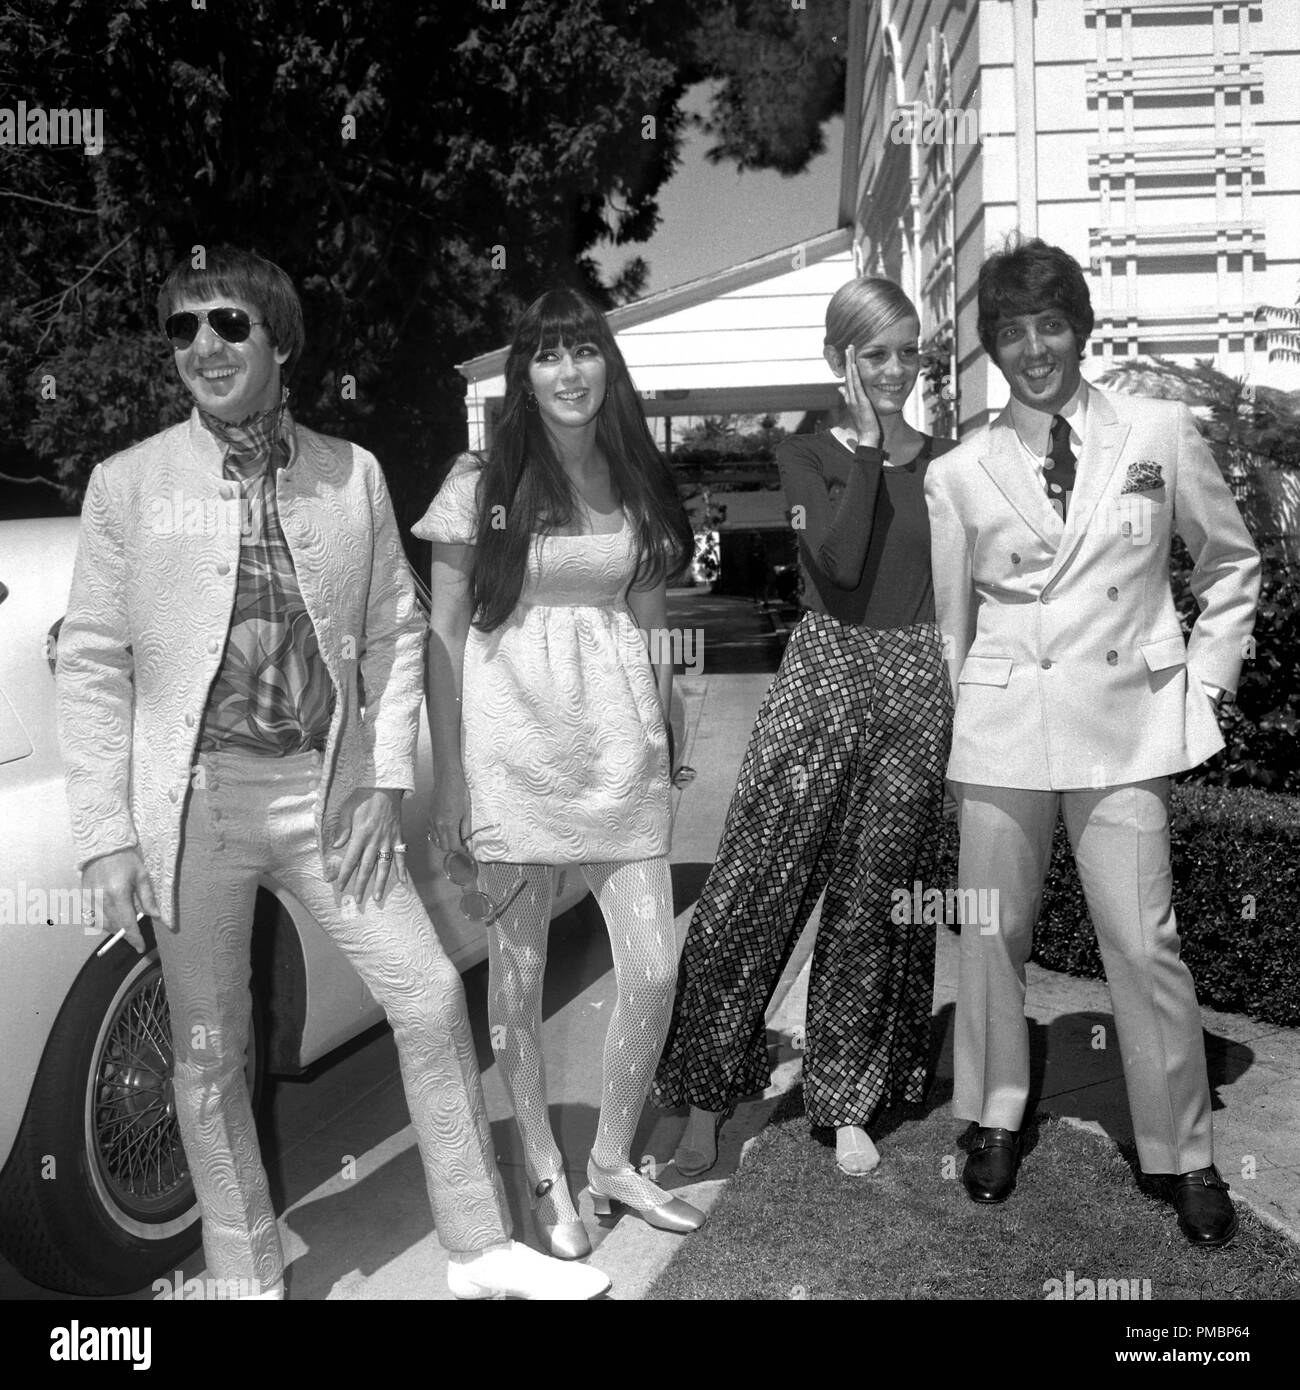 Sonny Bono, Cher, Twiggy and Justin de Villeneuve (Twiggy's boyfriend and manager), at a party held at the house of Sonny and Cher on May 15, 1967 in Beverly Hills, California.© JRC /The Hollywood Archive - All Rights Reserved  File Reference # 32603 269THA Stock Photo